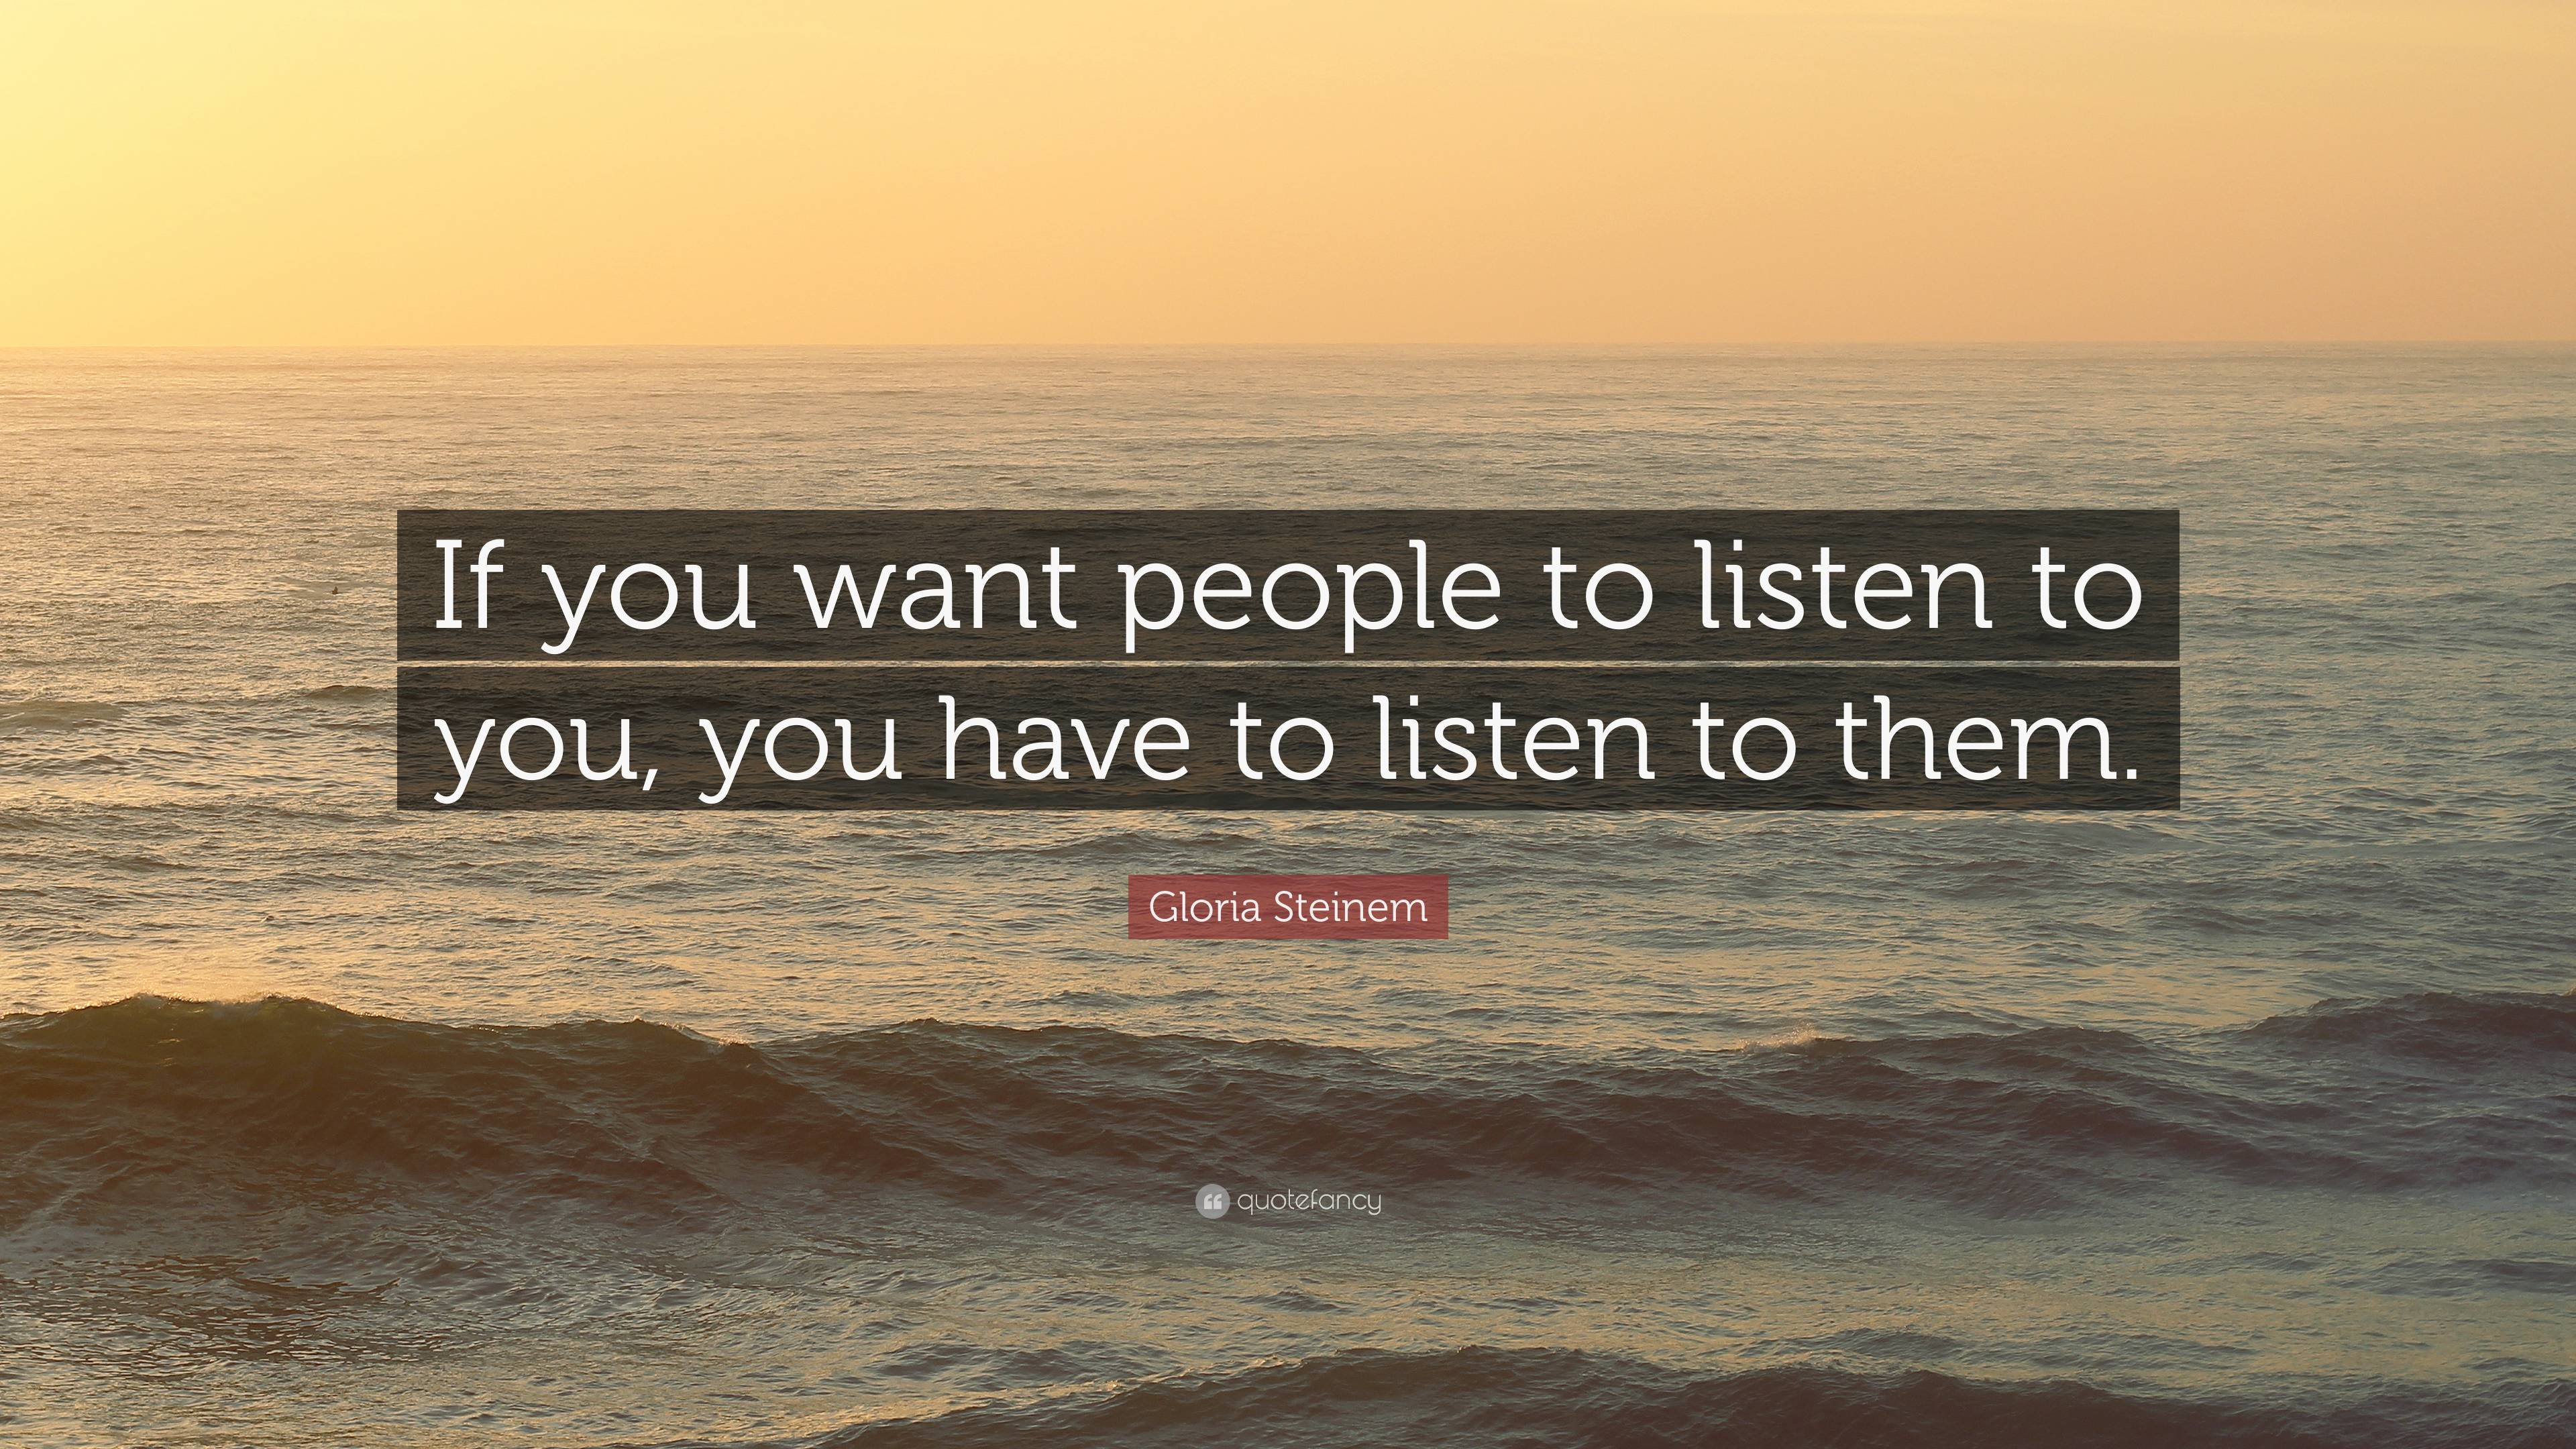 Gloria Steinem Quote: “If you want people to listen to you, you have to ...